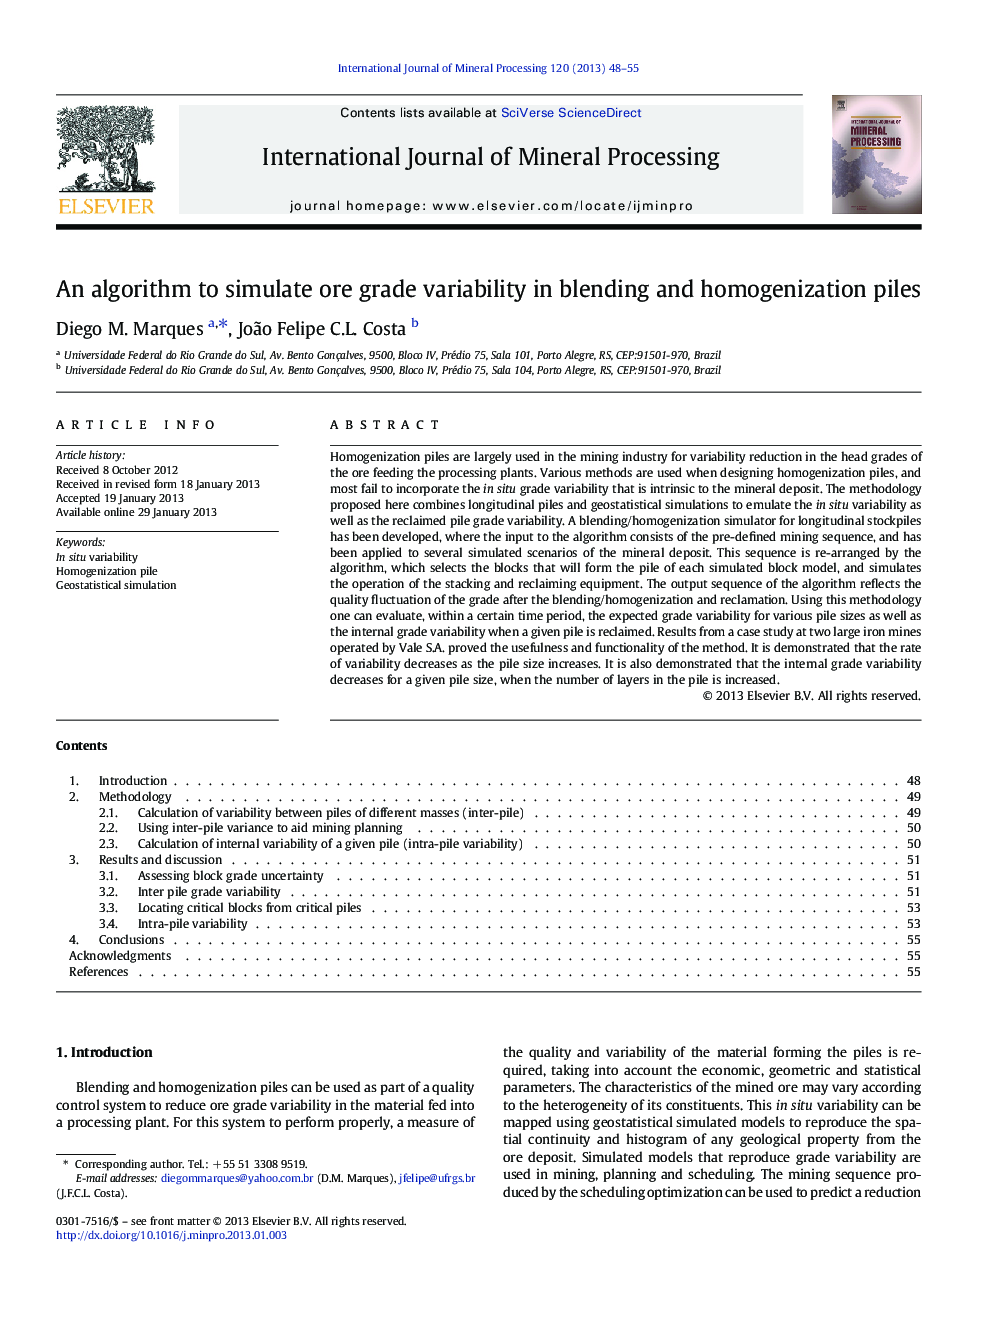 An algorithm to simulate ore grade variability in blending and homogenization piles